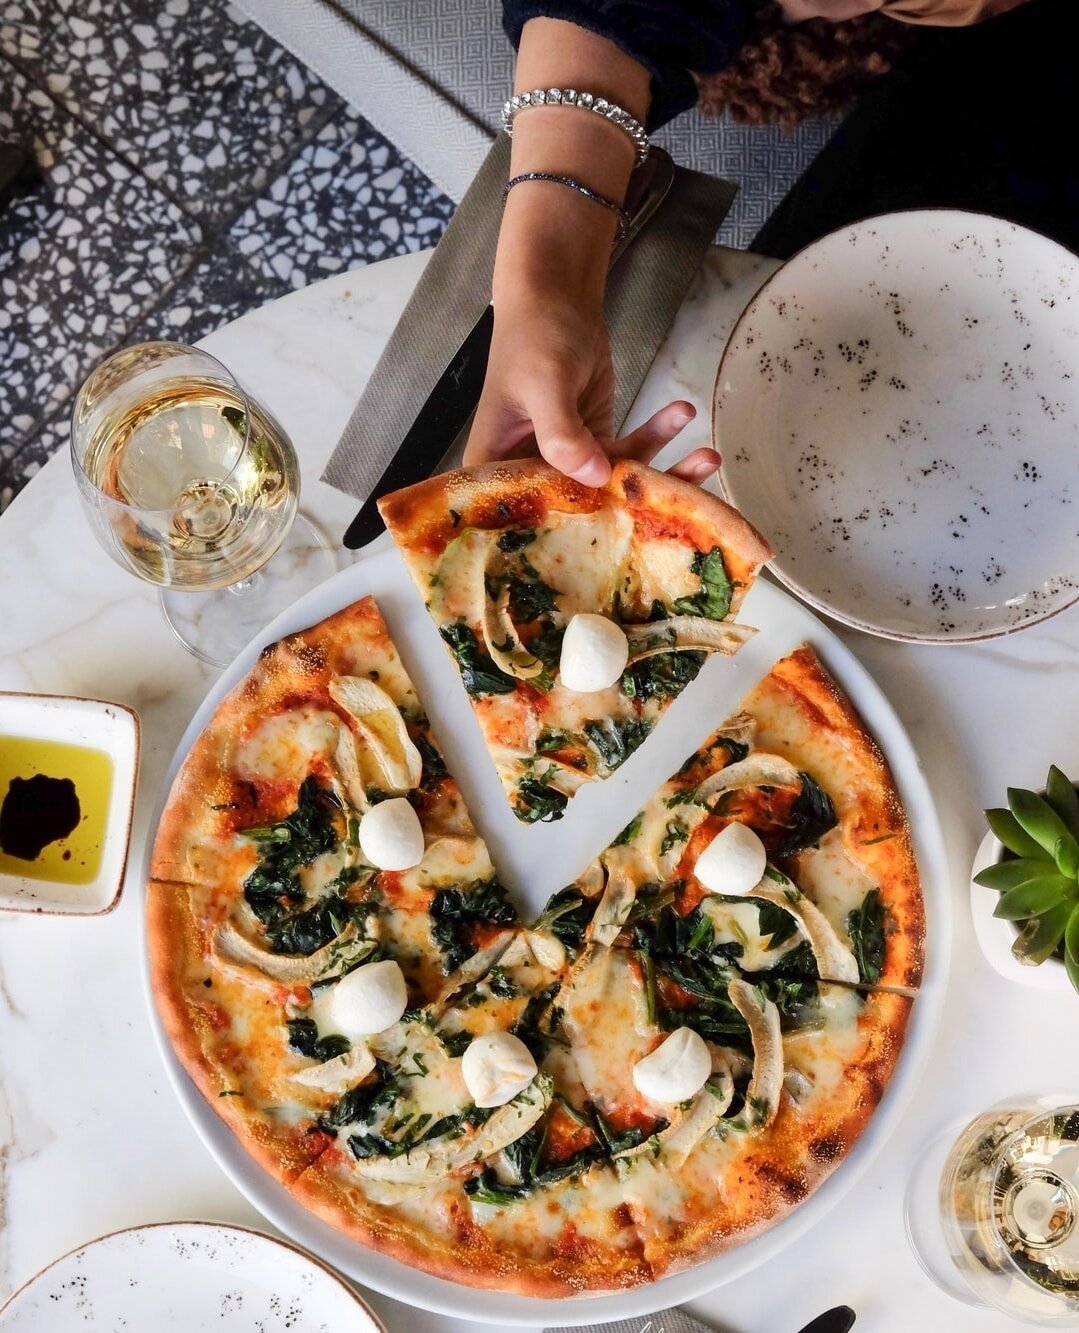 Did you know that MDC pairs perfectly with a yummy pizza for lunch? Well, you do now. 😉 (Support local NY) ⁠
⁠
*Must be 21+ to Sip Sip Hooray.⁠
⁠
#merchantsdaugtherhardcider #hudsonvalley #nycider  #pickcider #ciderlover #merchantsdaughter #nyc #piz